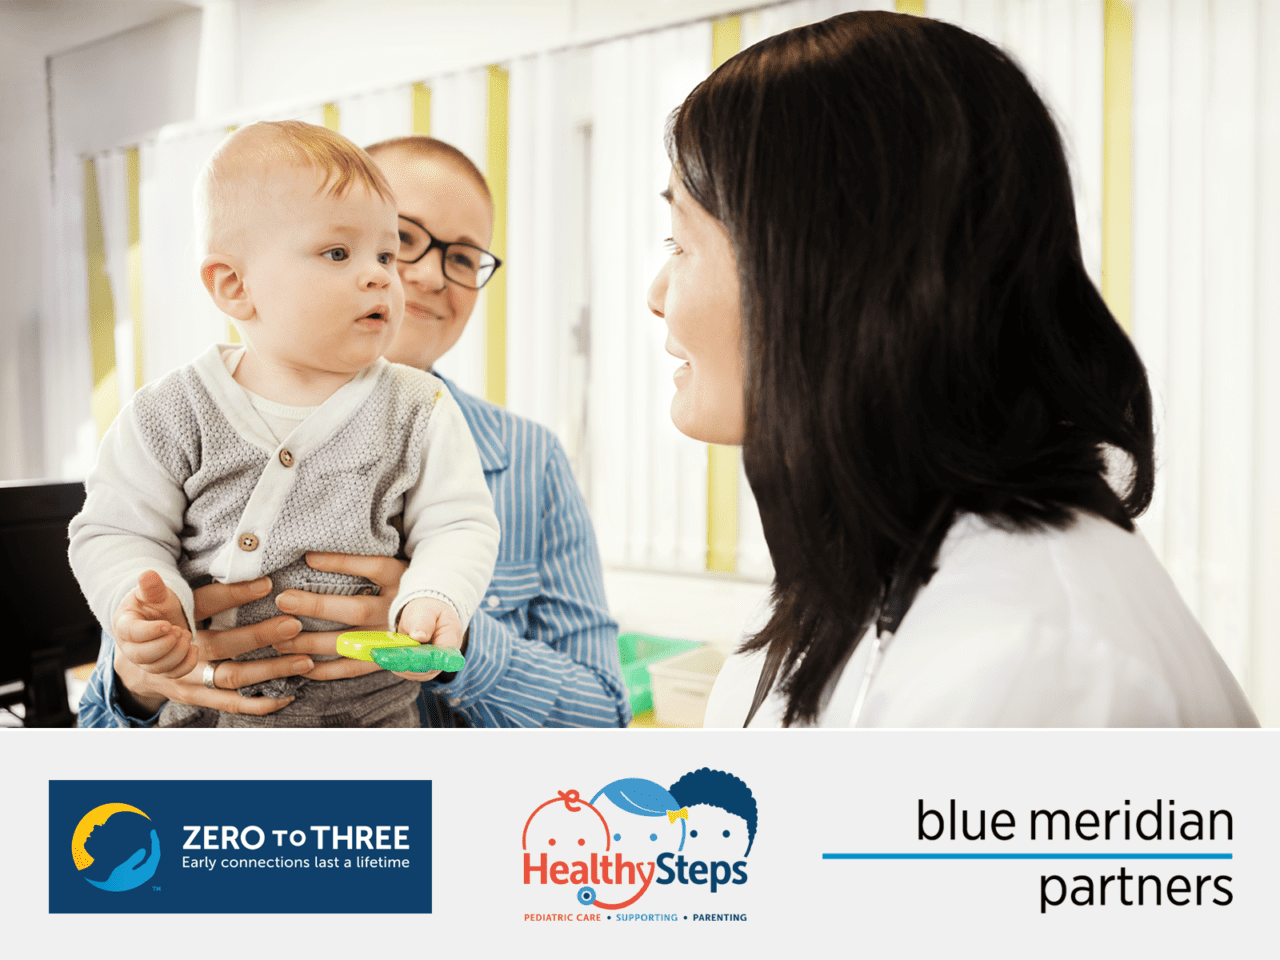 Baby visiting pediatrician and logos: ZERO TO THREE, HealthSteps, and Blue Meridian Partners